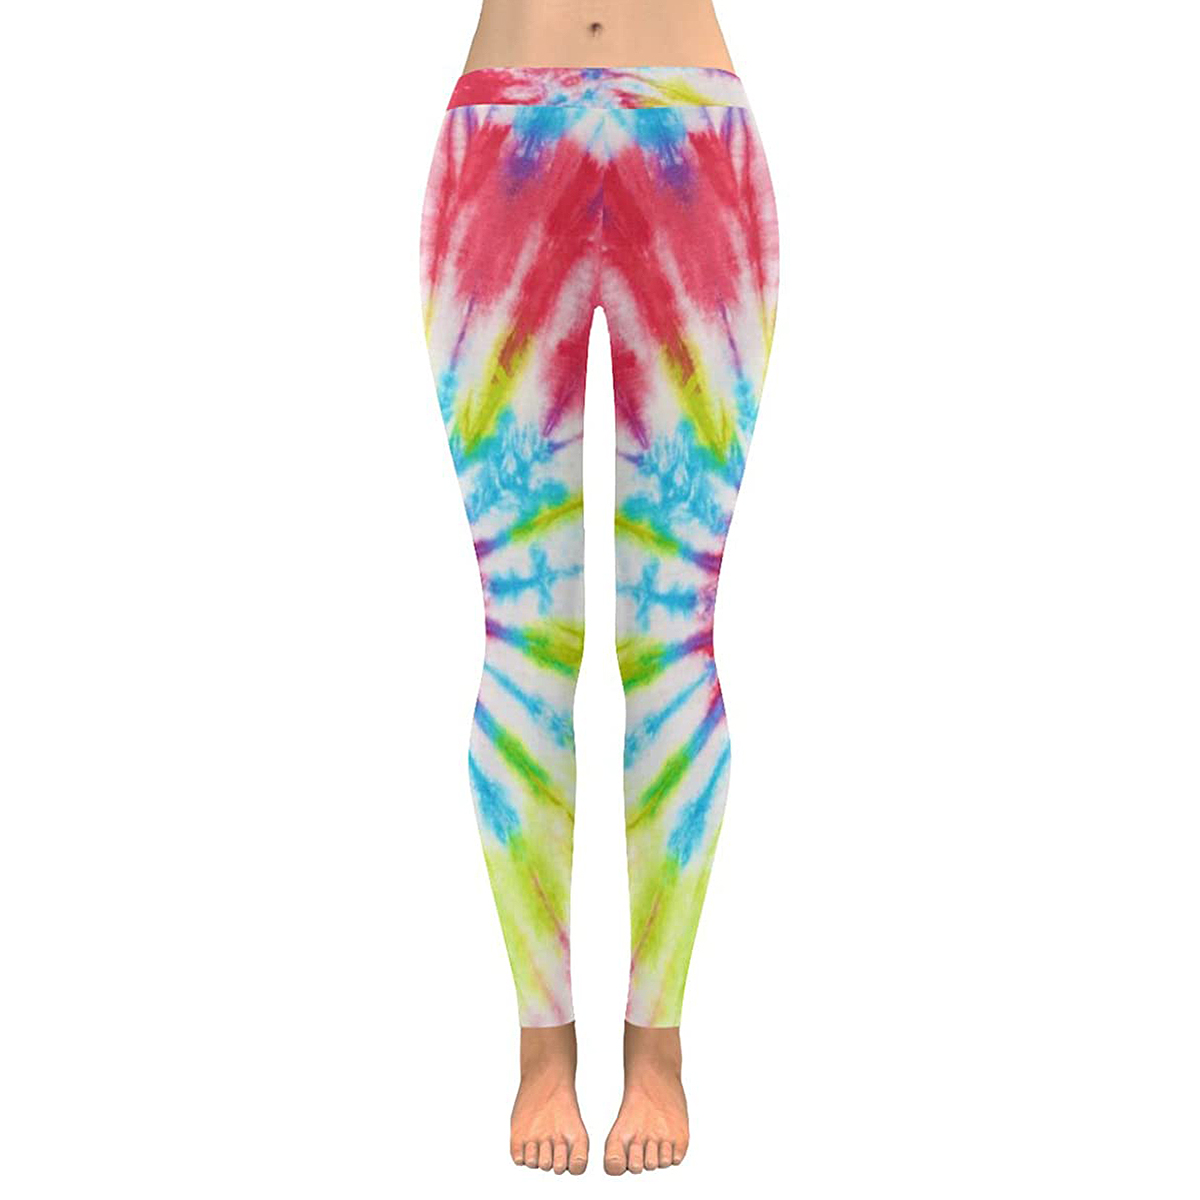 5 Pairs of Tie-Dye Leggings That Will Brighten Your Life With Color ...